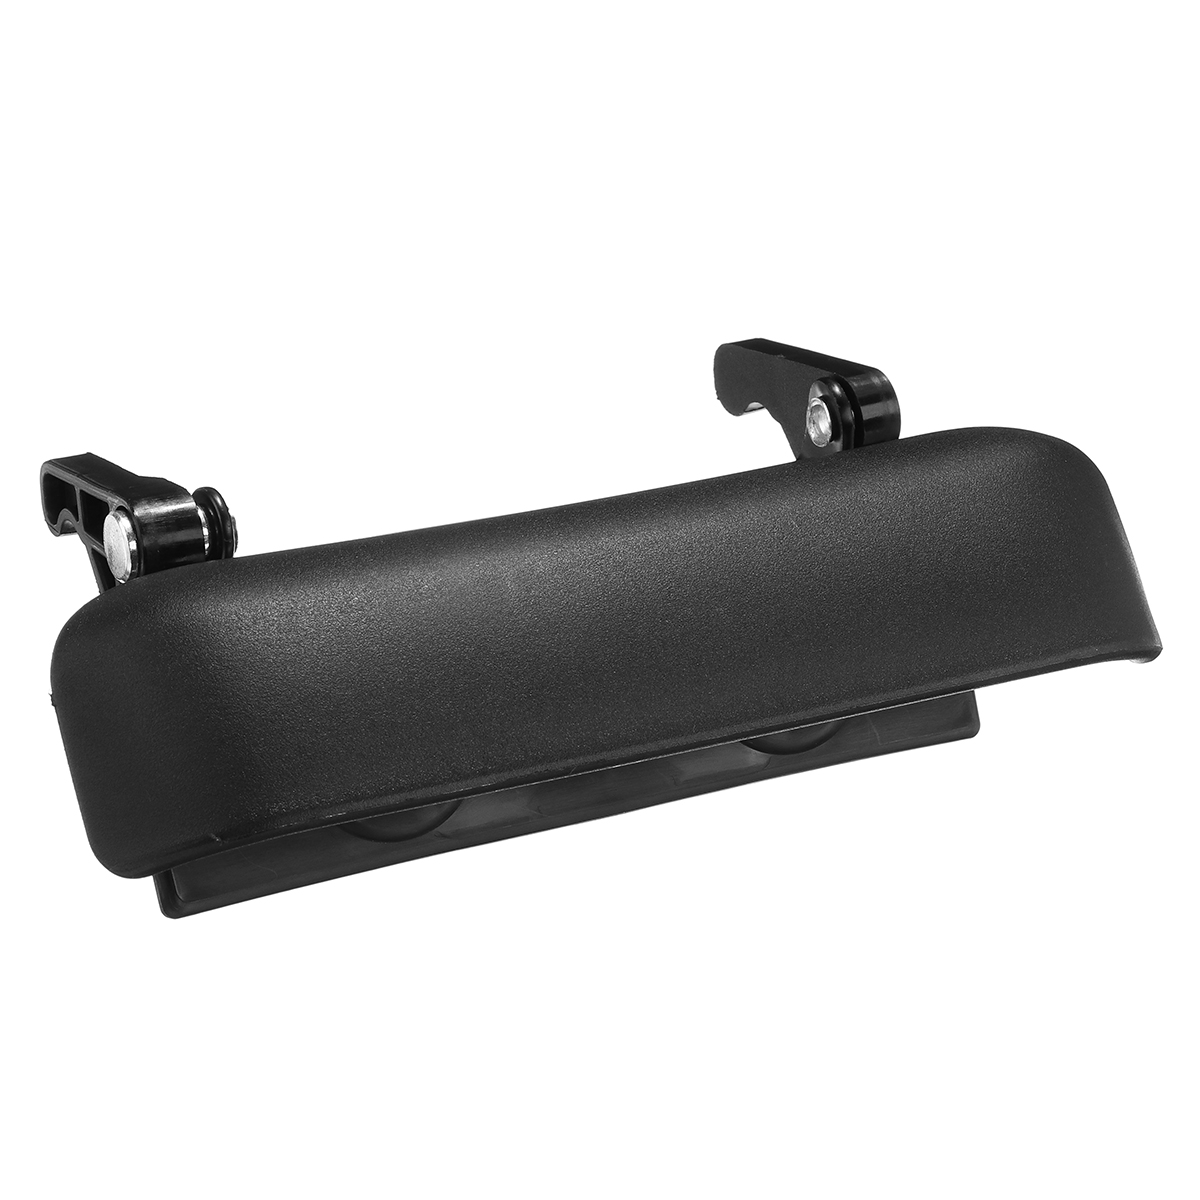 Car Tailgate Tail Gate Door Handle for Ford Ranger 93-11 F150 92-96 Mazda Pickup 1993-2010